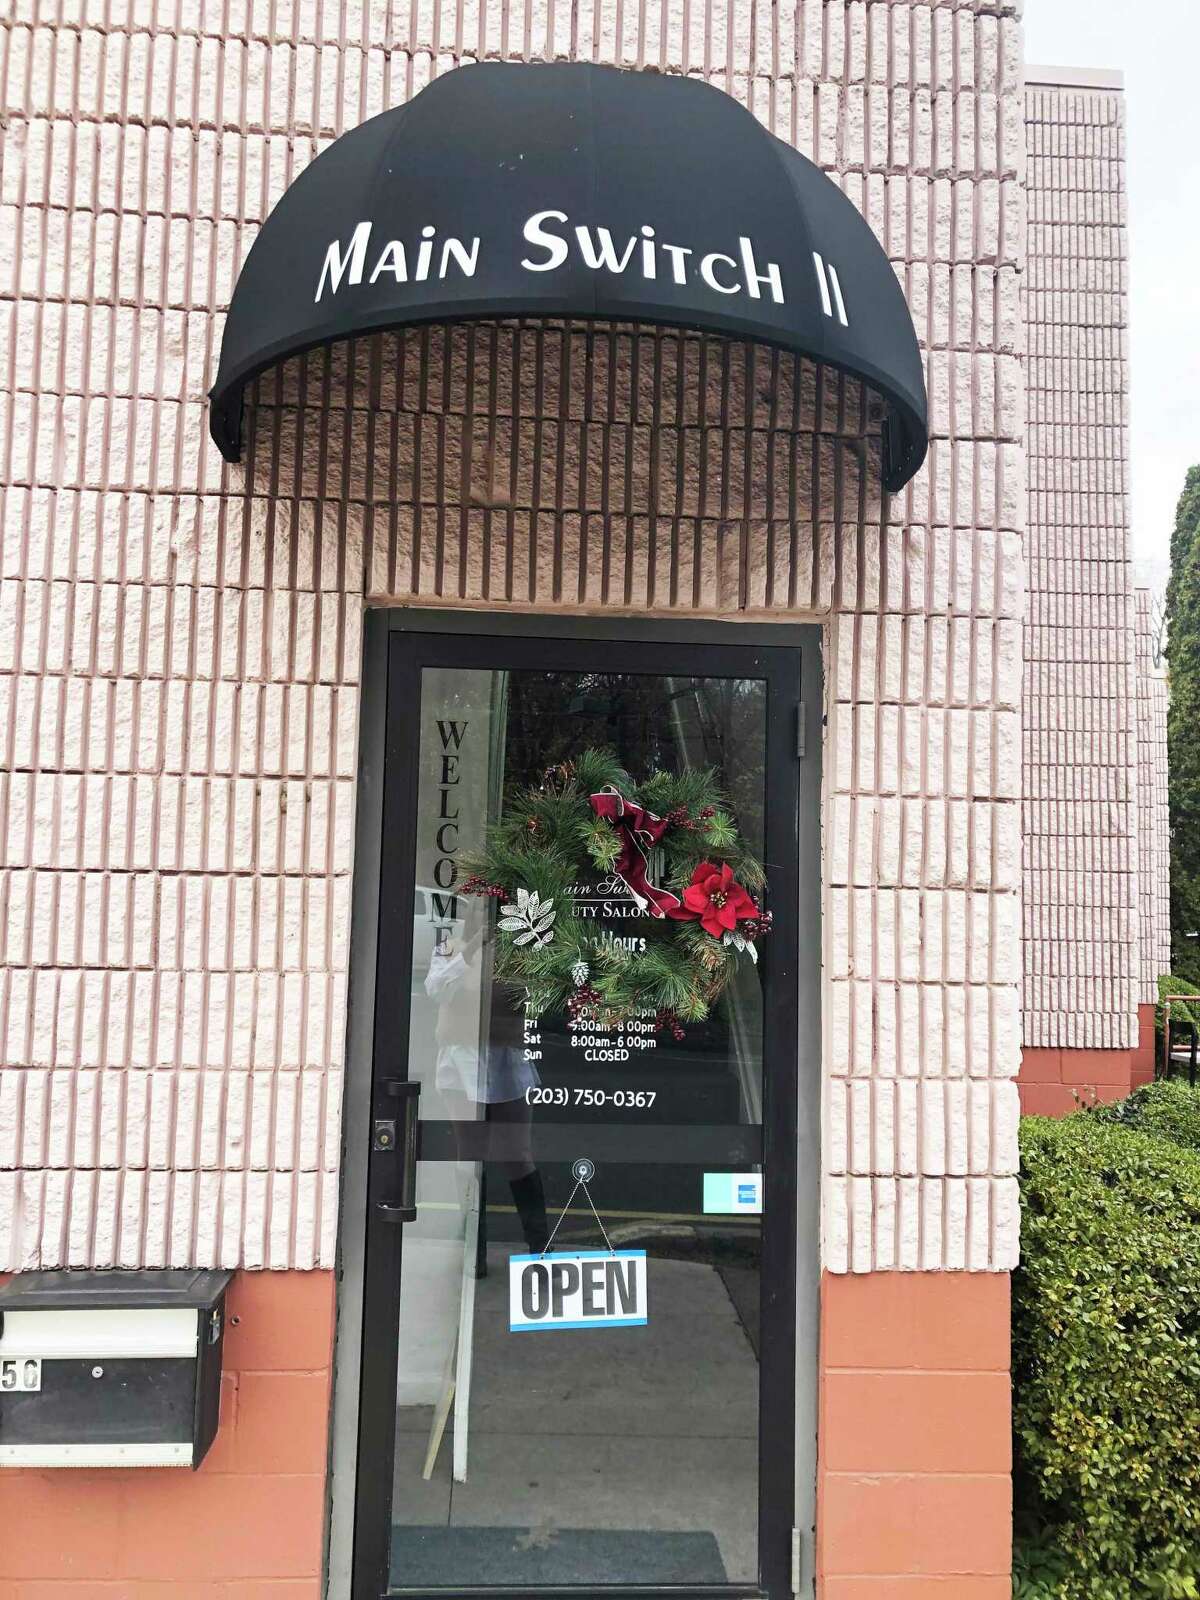 The Main Switch Beauty Salon II will be opening at 56 Westport Ave. in Norwalk. Owner Sonia Santavenere specializes in biracial and overly curly hair.